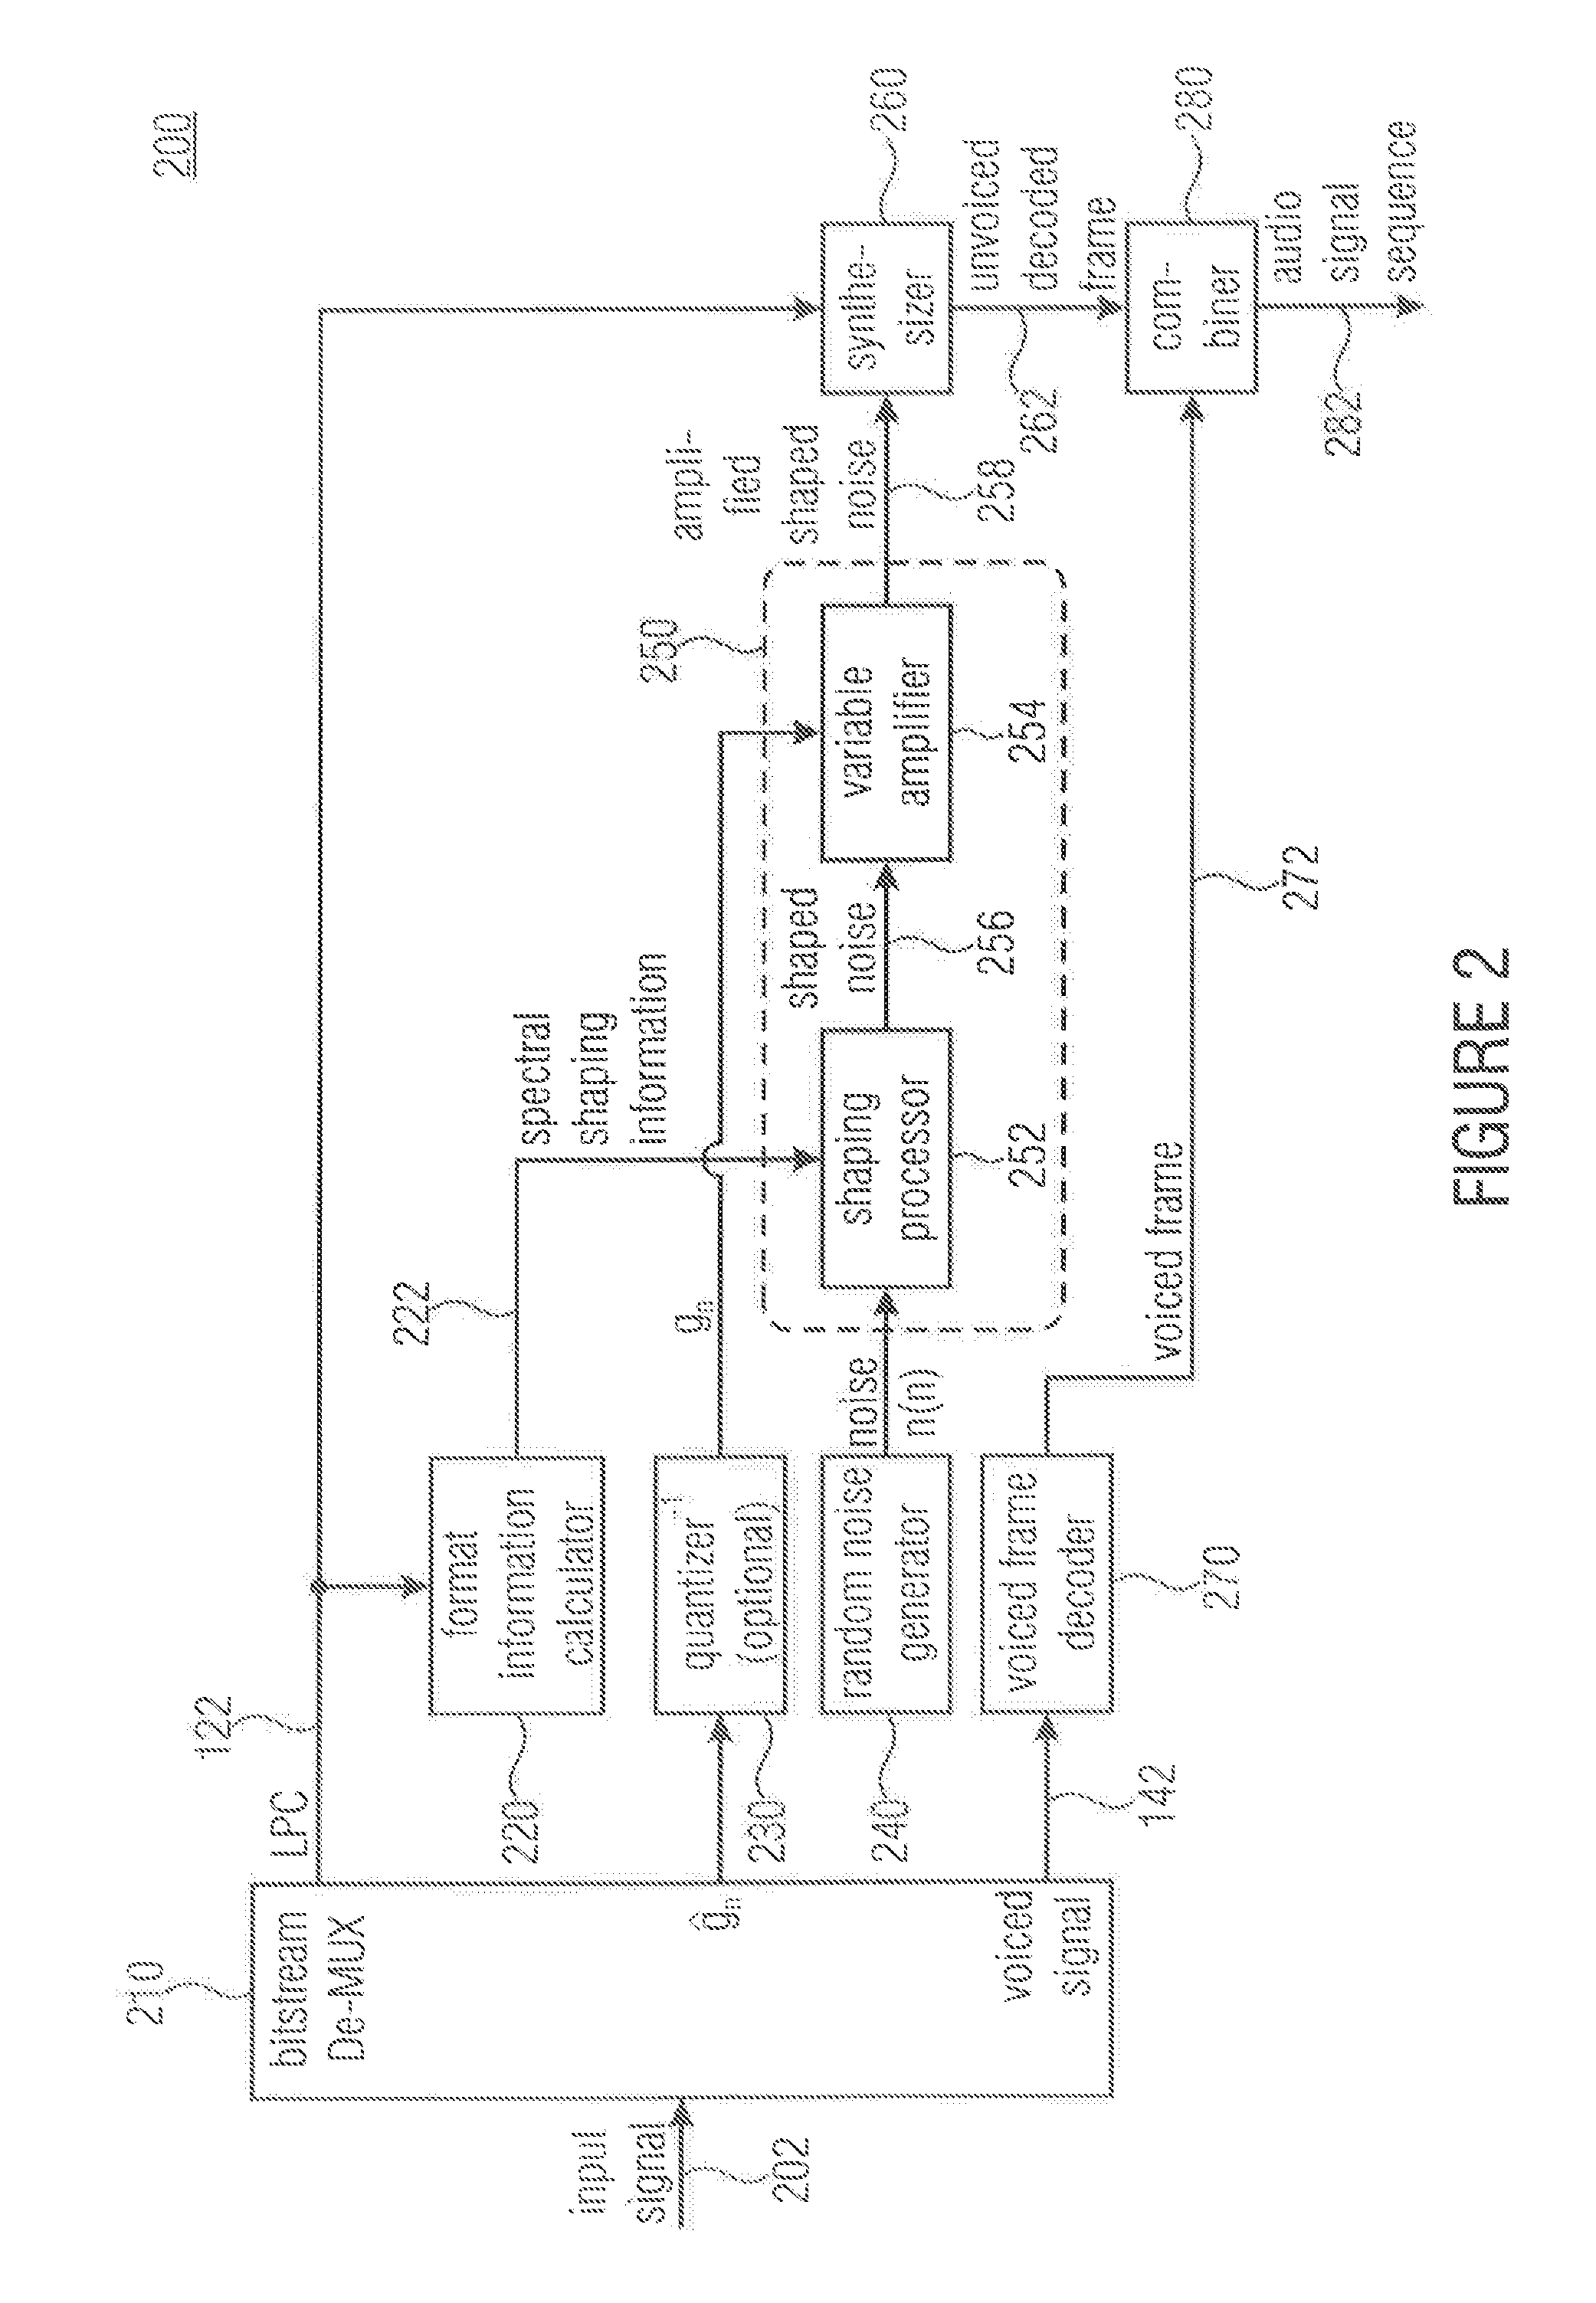 Concept for encoding an audio signal and decoding an audio signal using deterministic and noise like information